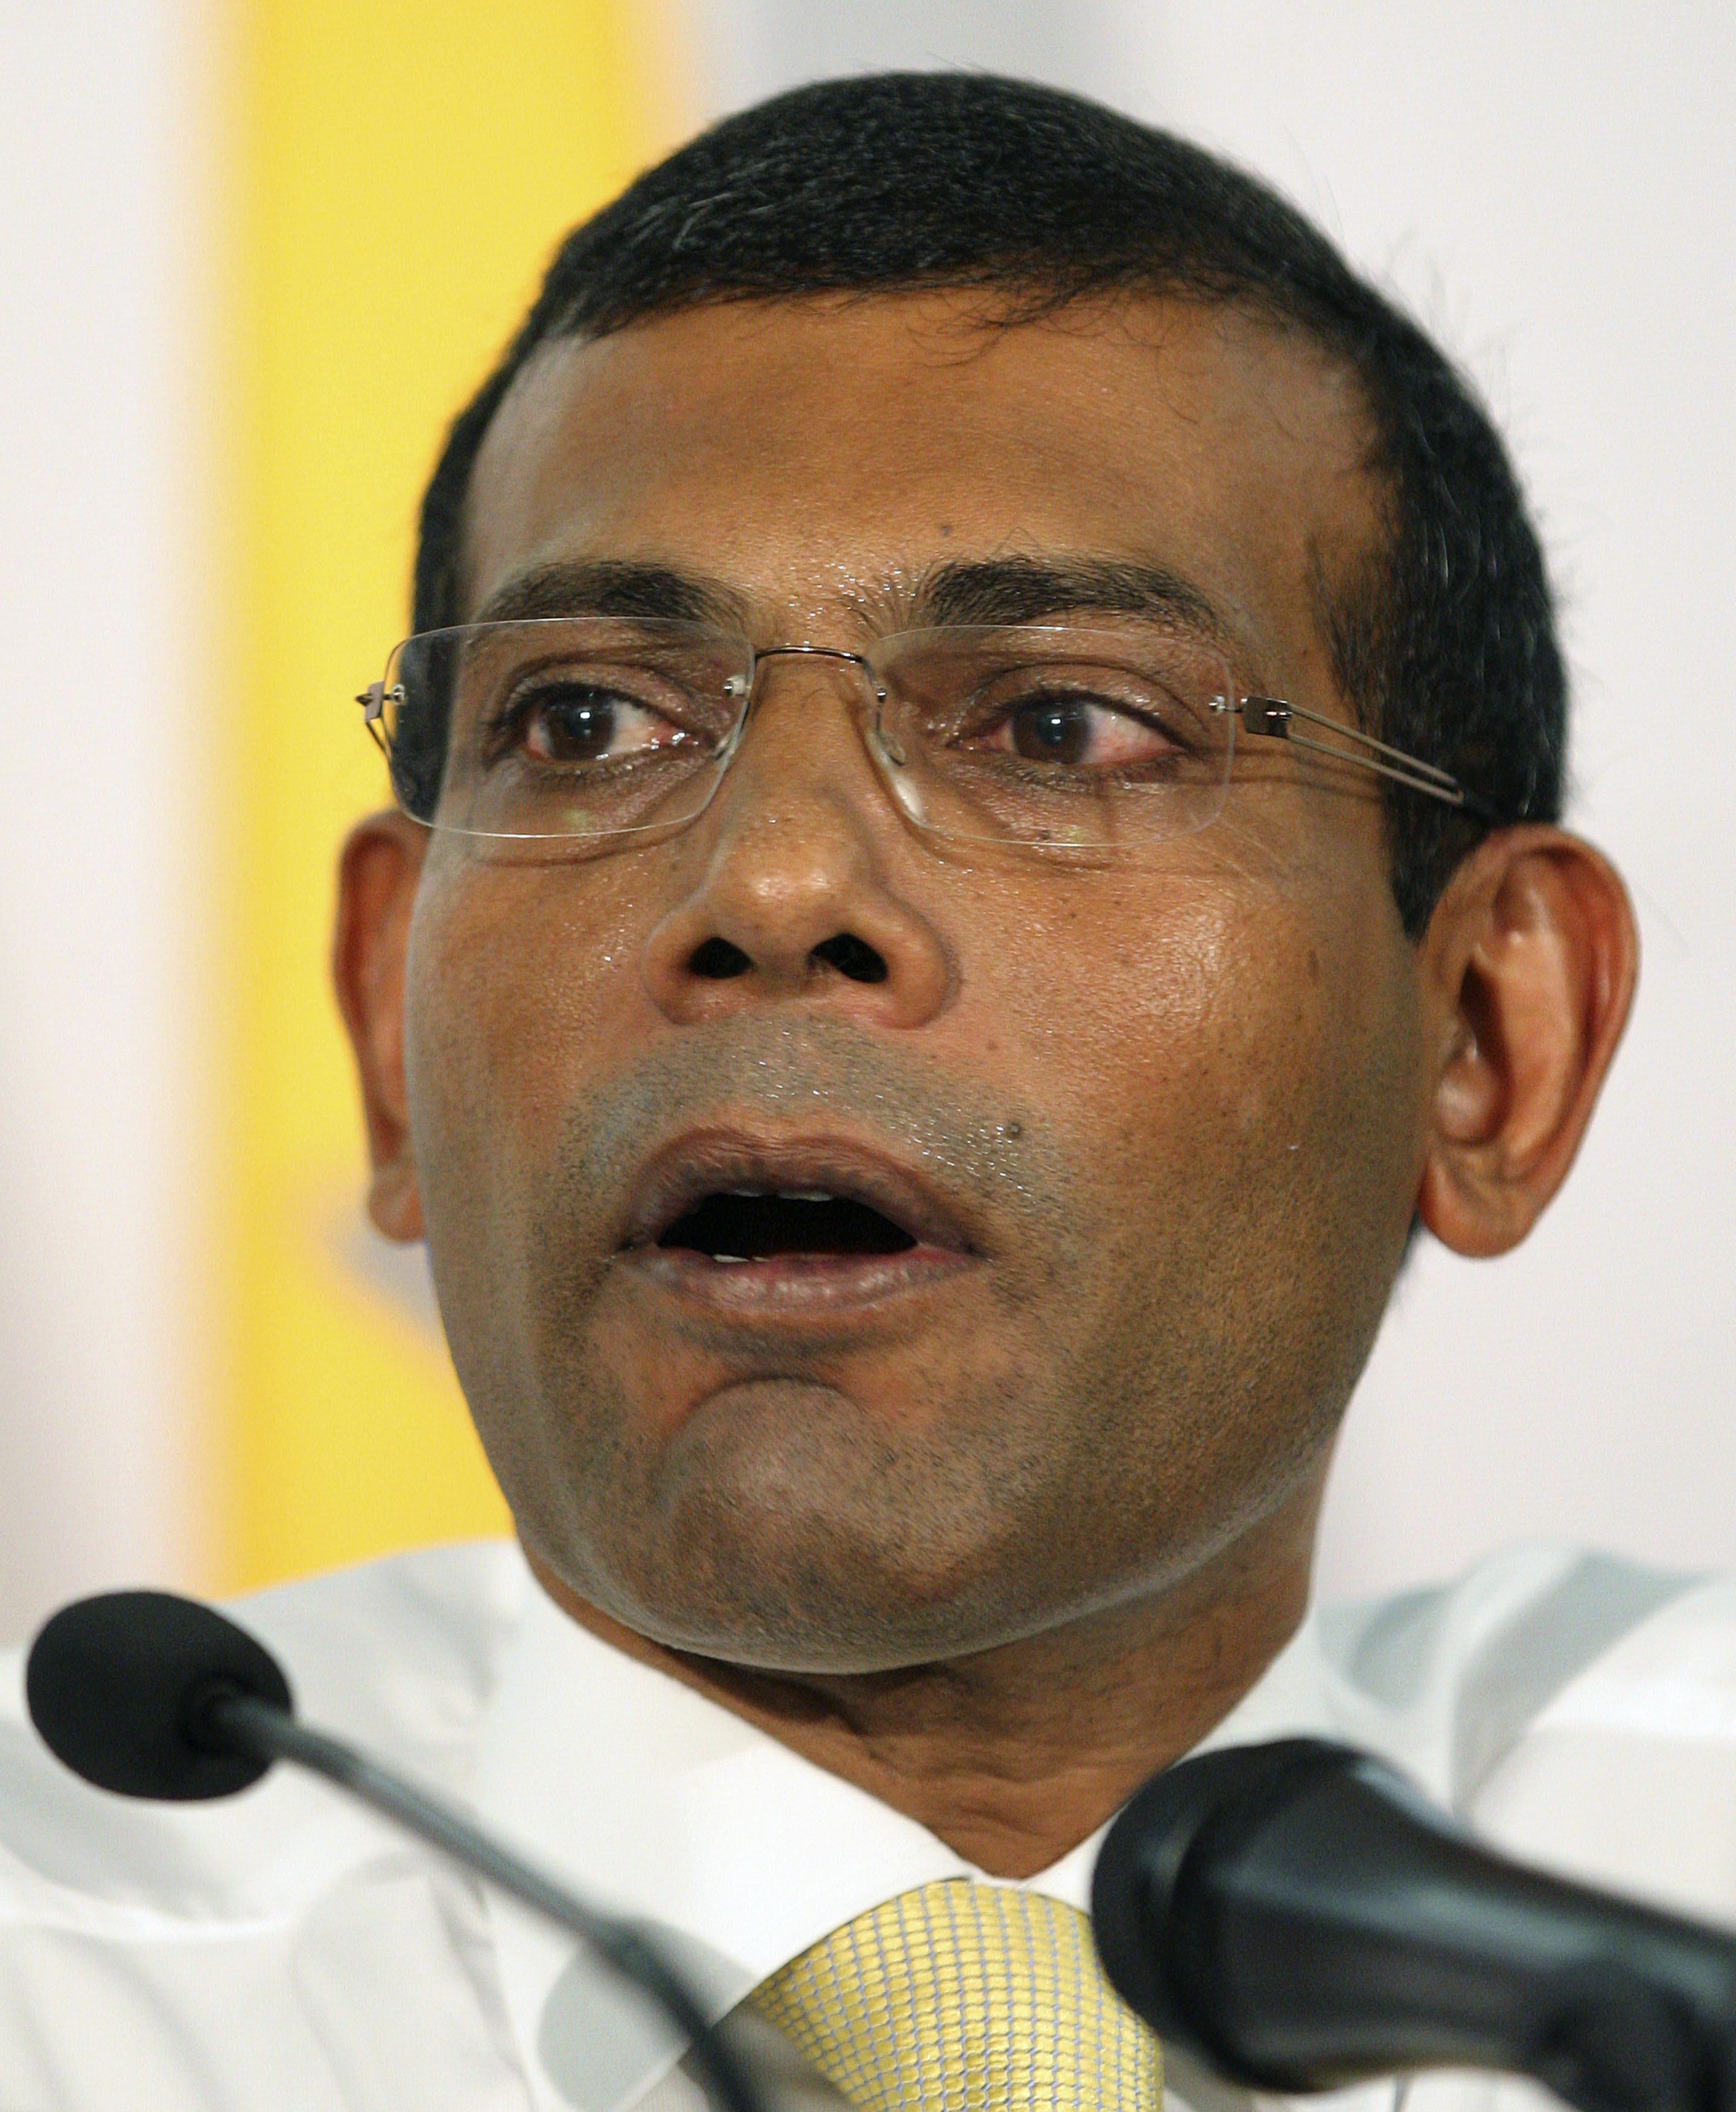 Maldivian Democratic Party presidential candidate Mohamed Nasheed, who was ousted as President in 2012, speaks to reporters in Male, Maldives, on Nov. 10, 2013 (Stringer—REUTERS)